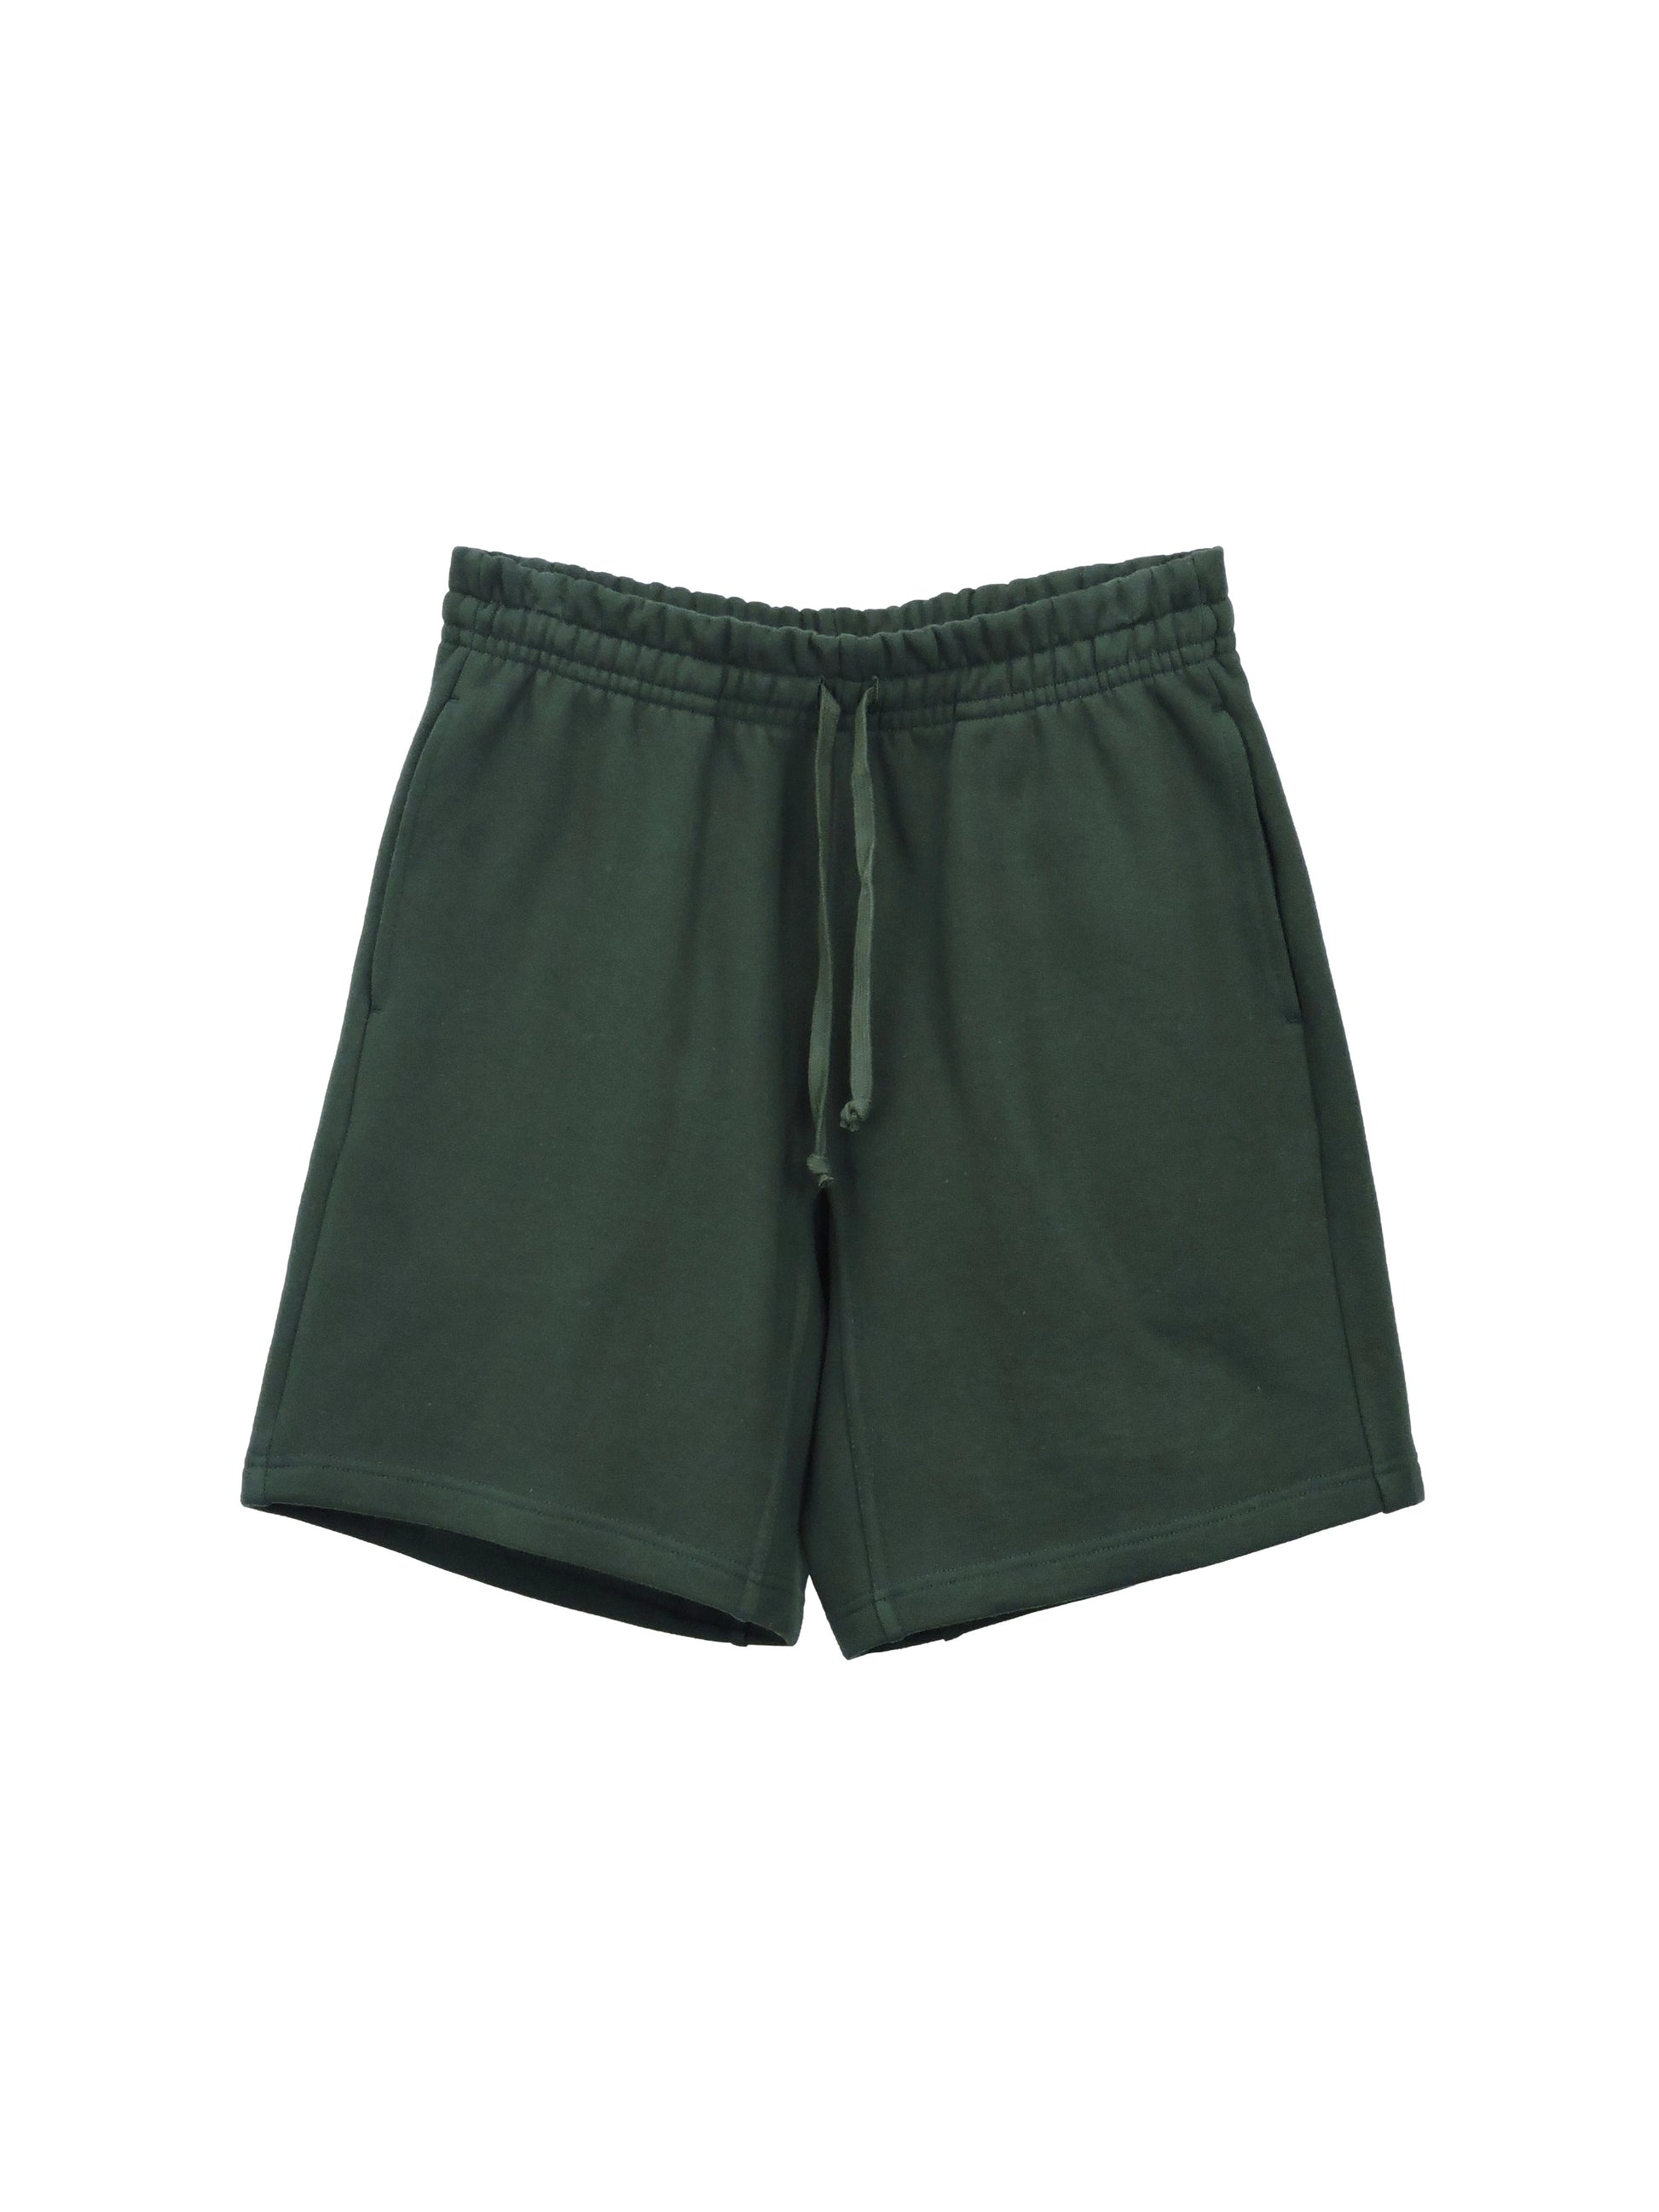 Forest Green Shorts with Blended Drawstrings